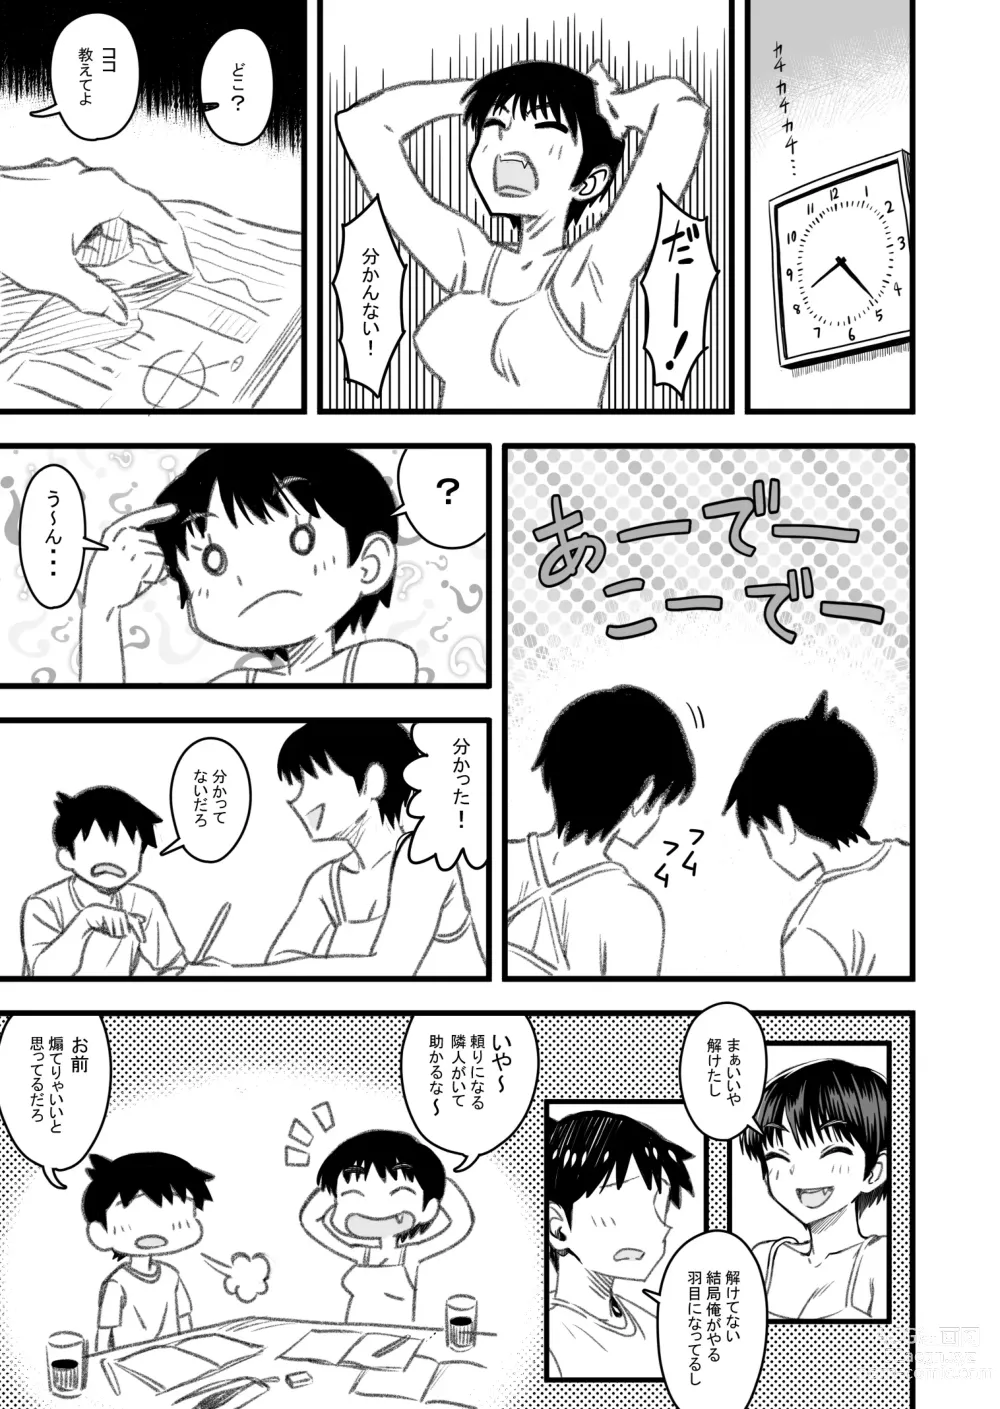 Page 24 of doujinshi How will the Protagonist's Brain be destroyed?